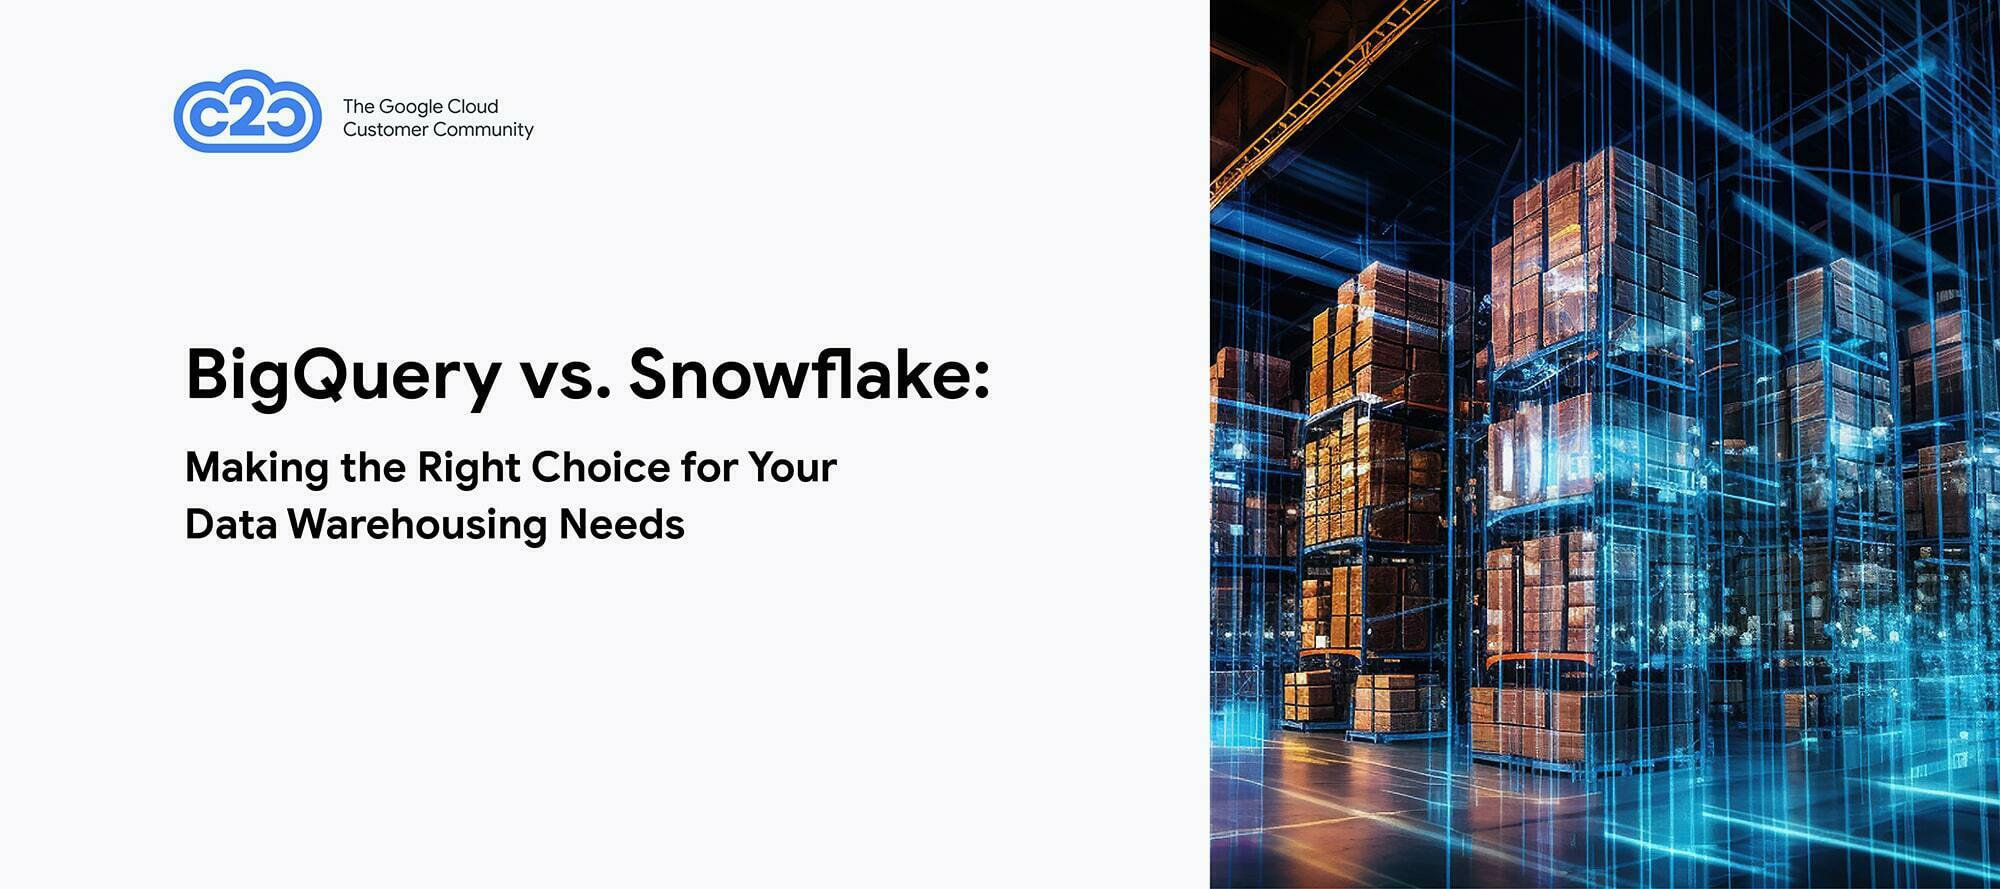 BigQuery vs. Snowflake: Making the Right Choice for Your Data Warehousing Needs